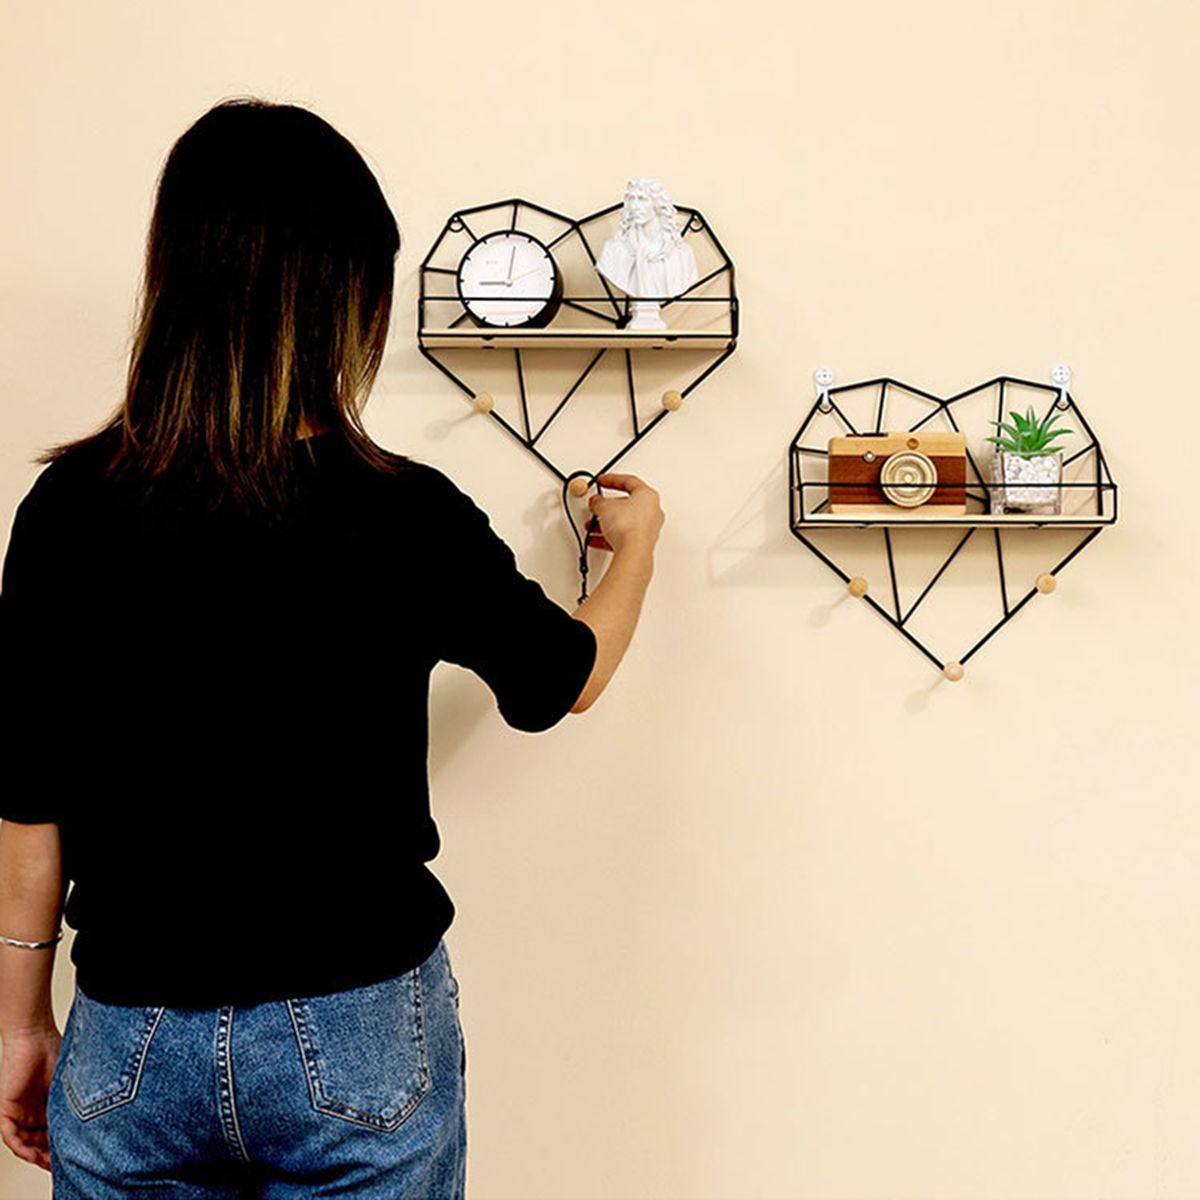 Heart-Shaped-Metal-Wire-amp-Wooden-Rack-Wall-Unit-Hanging-Shelf-1726195